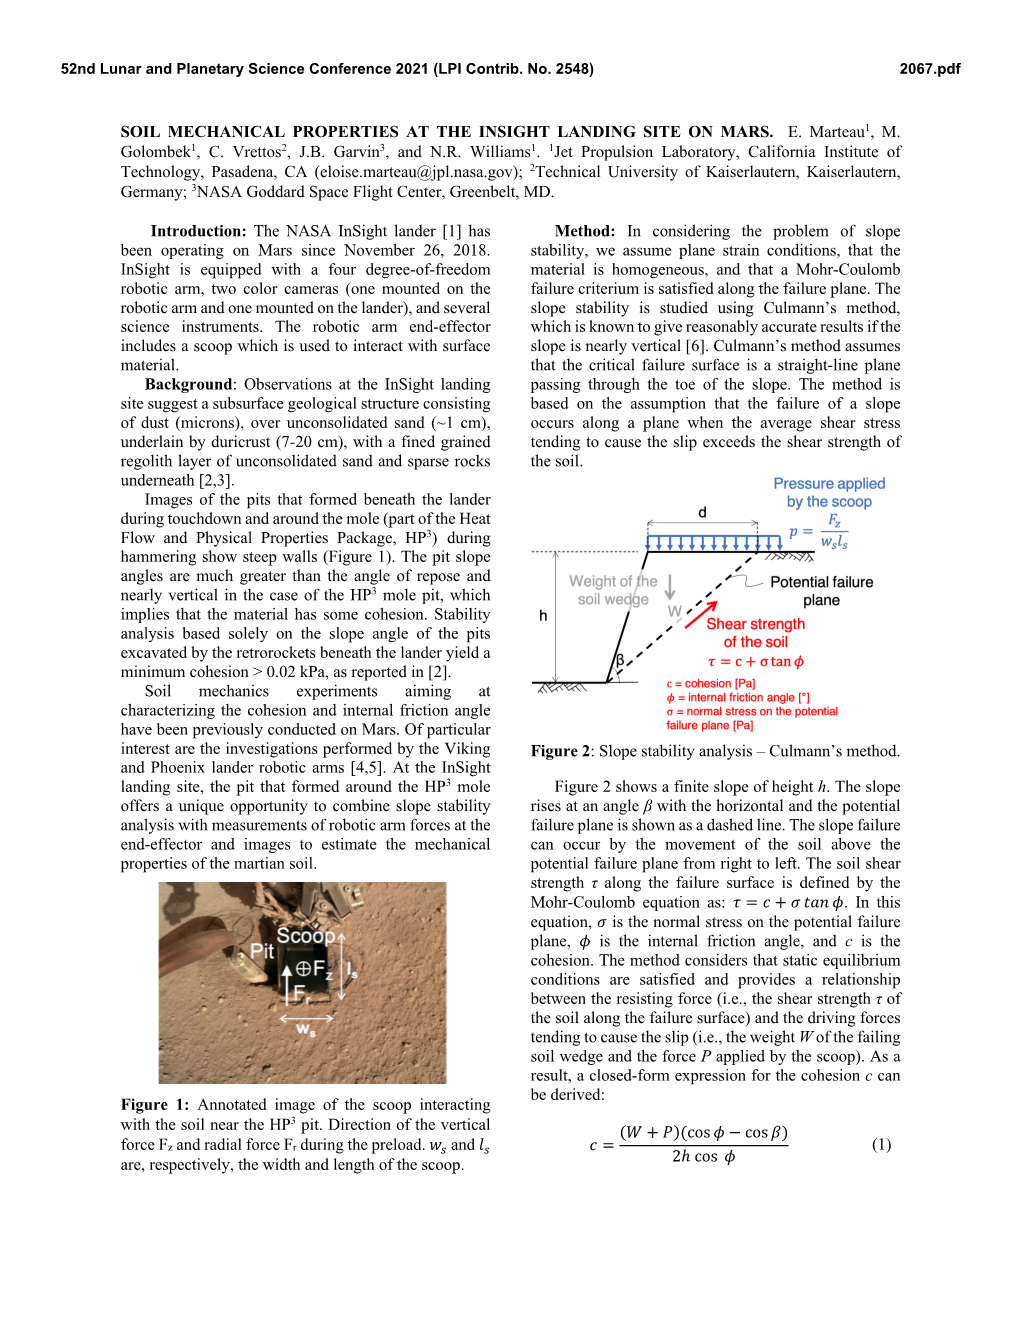 Soil Mechanical Properties at the Insight Landing Site on Mars